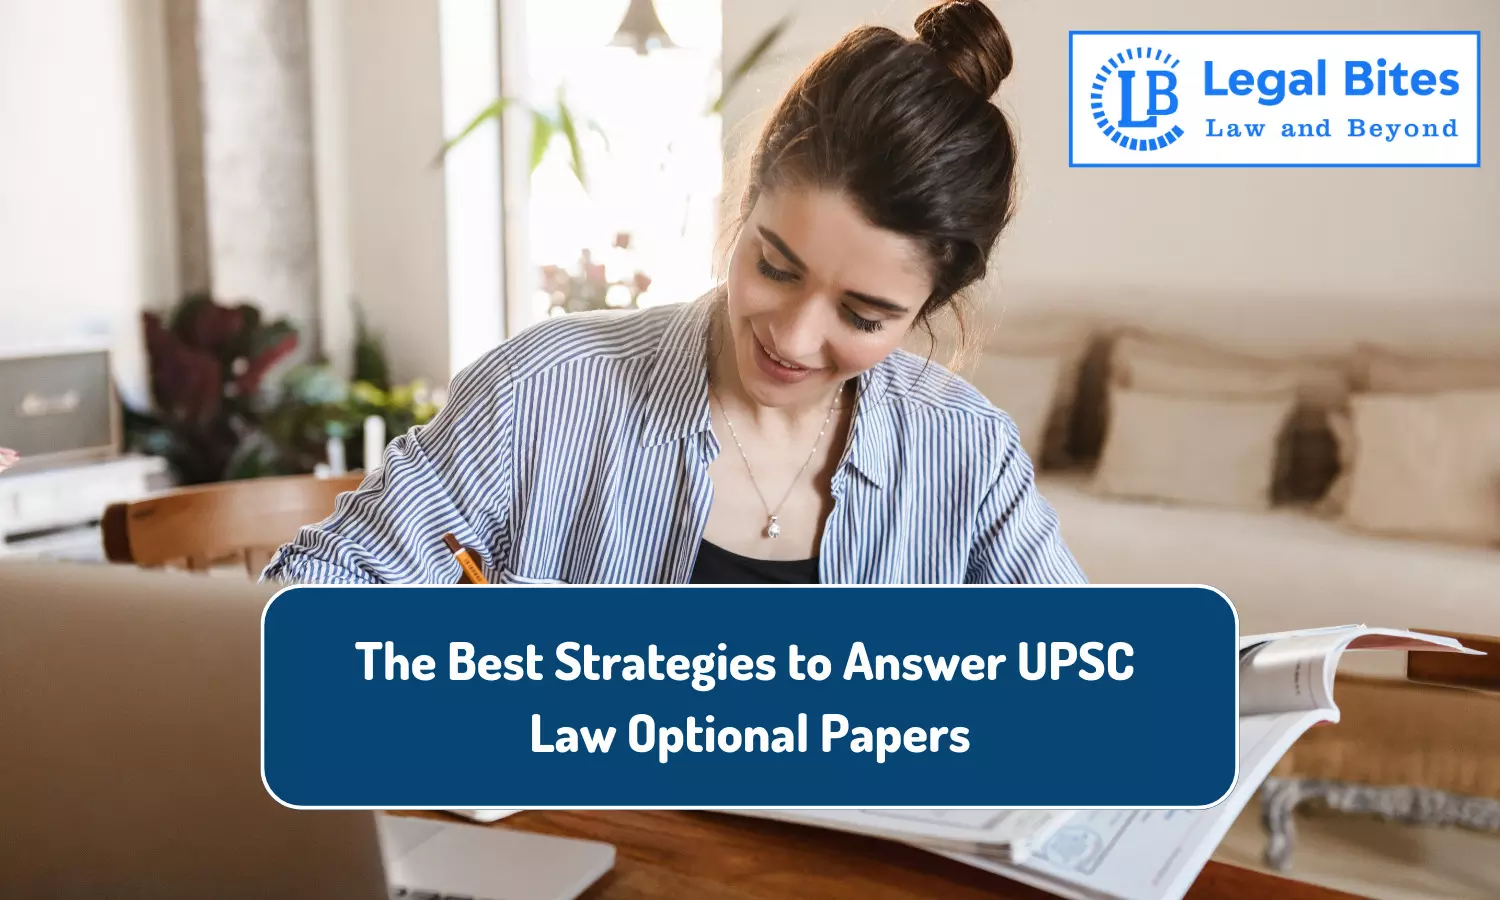 The Best Strategies to Answer UPSC Law Optional Papers